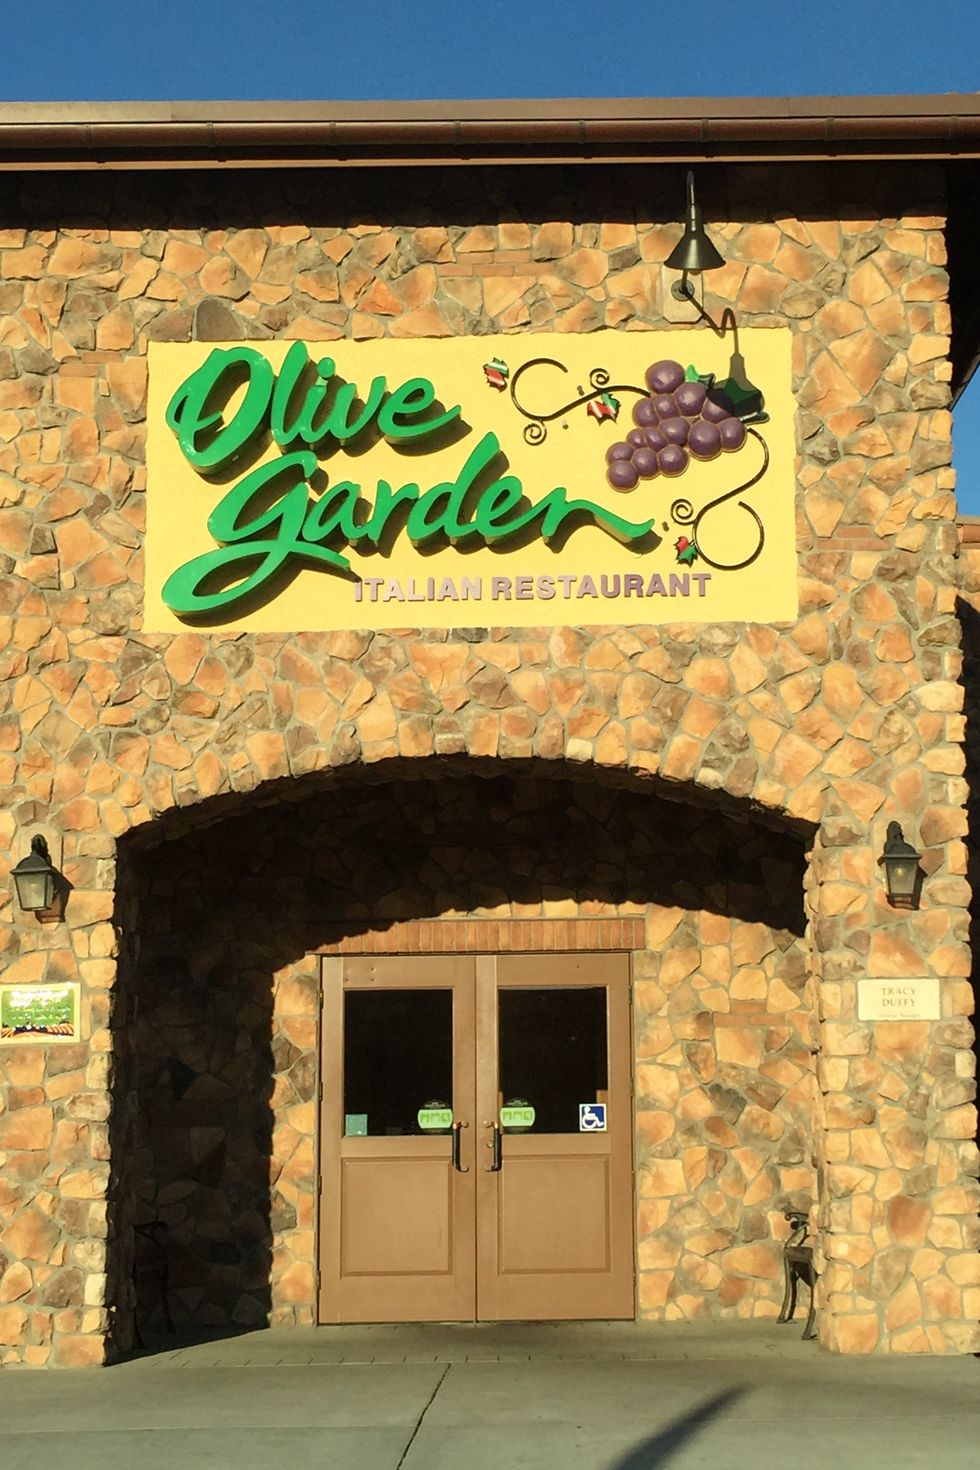 Olive Garden Takes Fries and Milkshakes Off the Kids' Menu - Eater